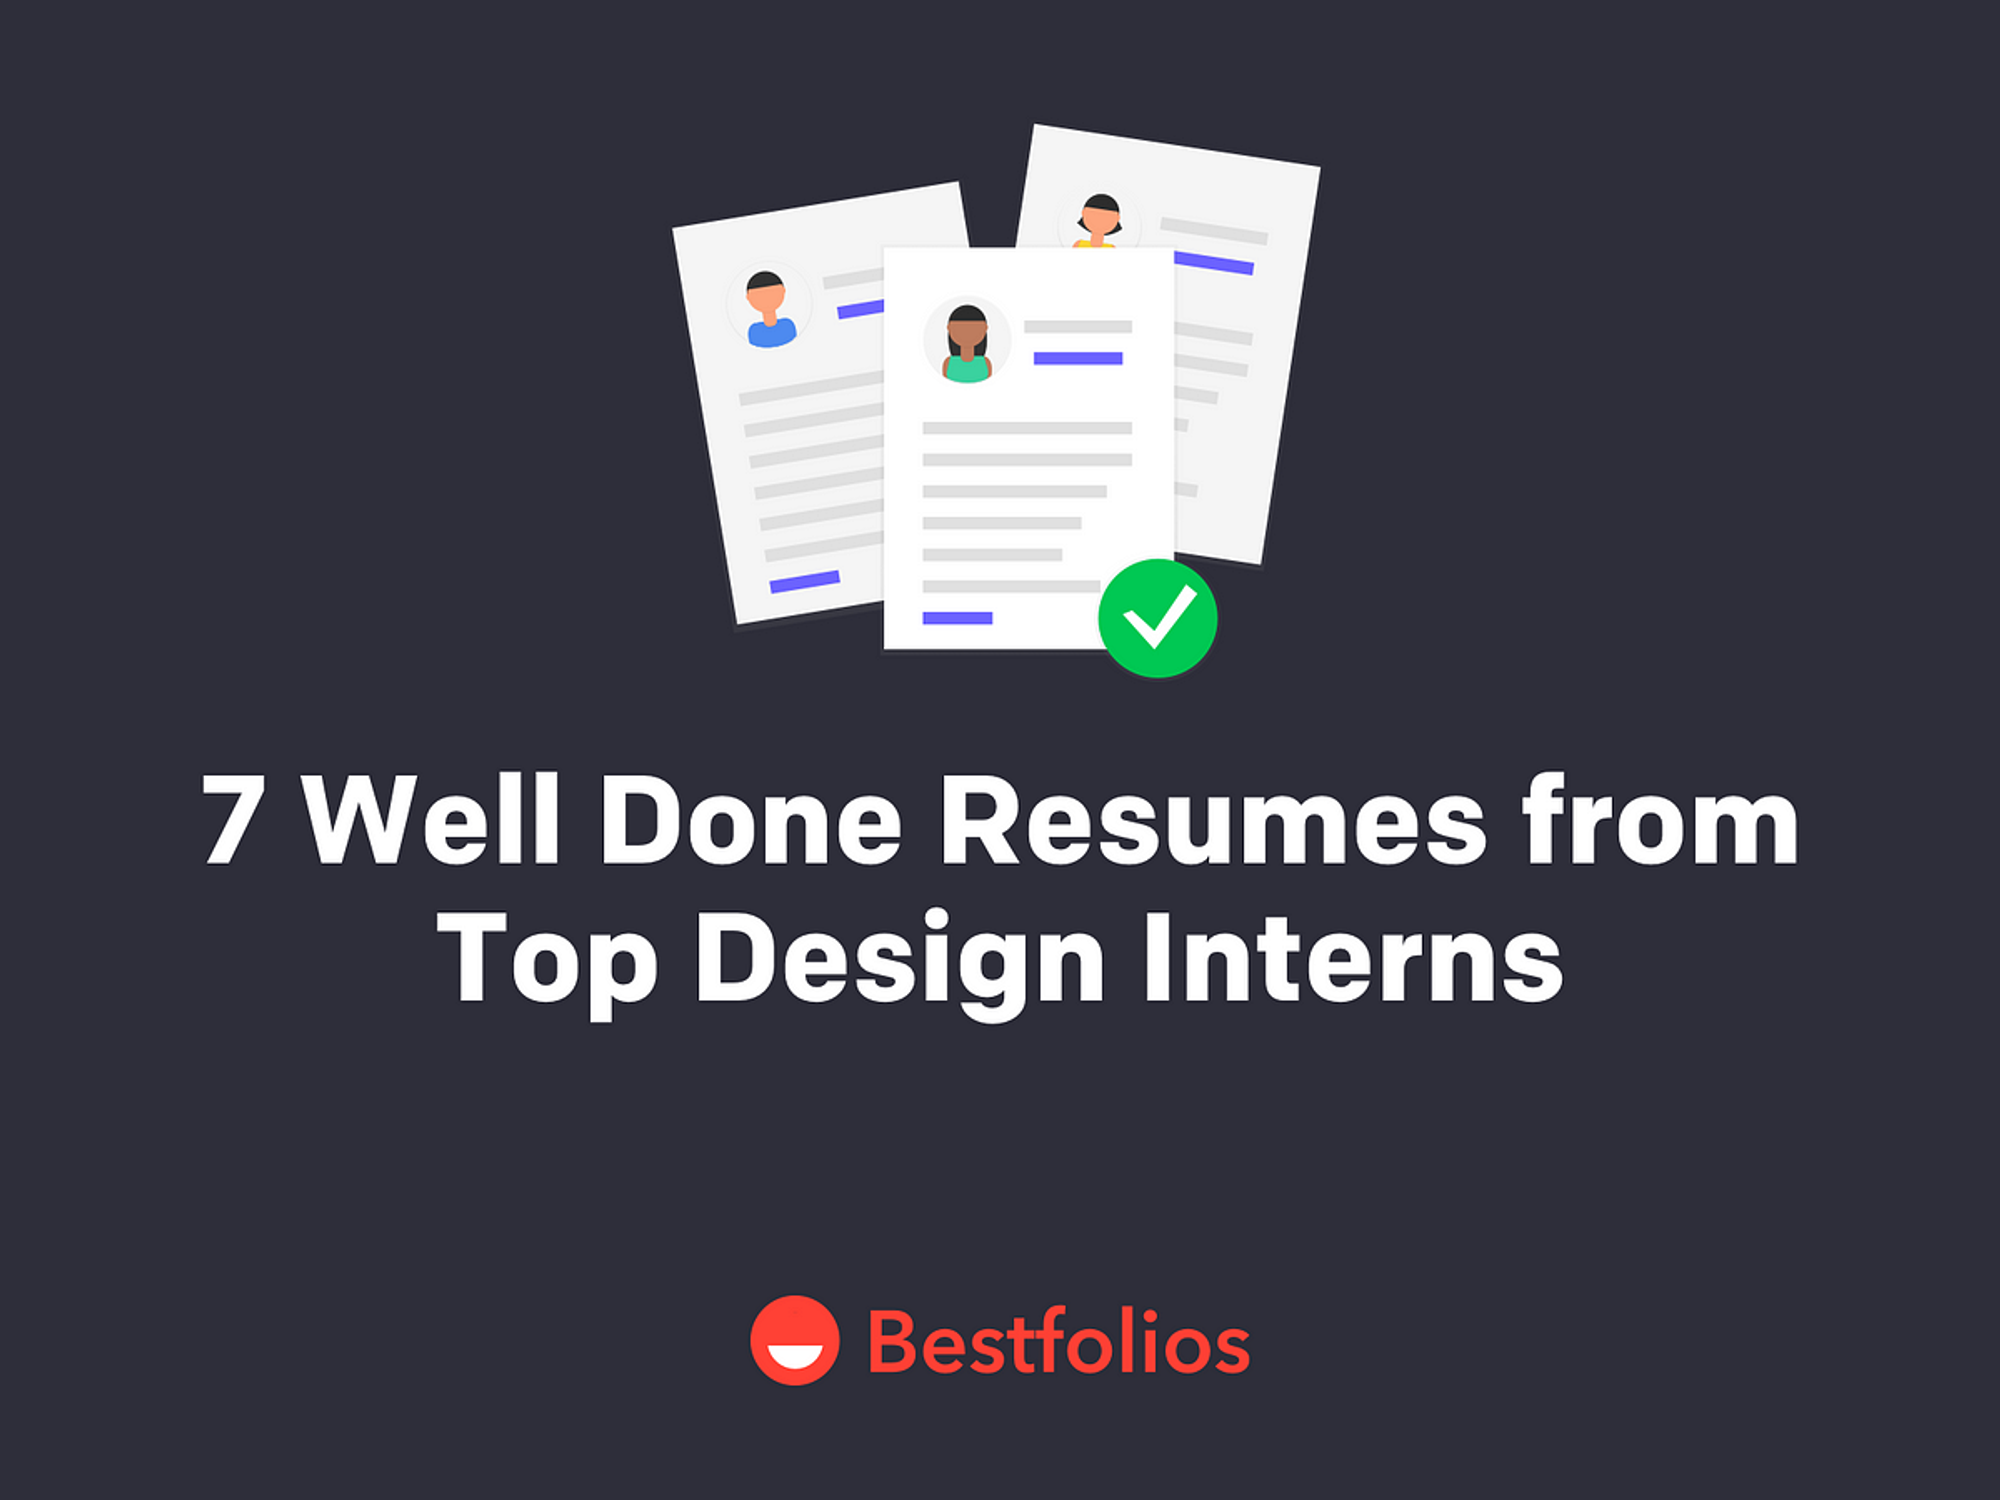 7 Well Done Resumes from Top Design Interns